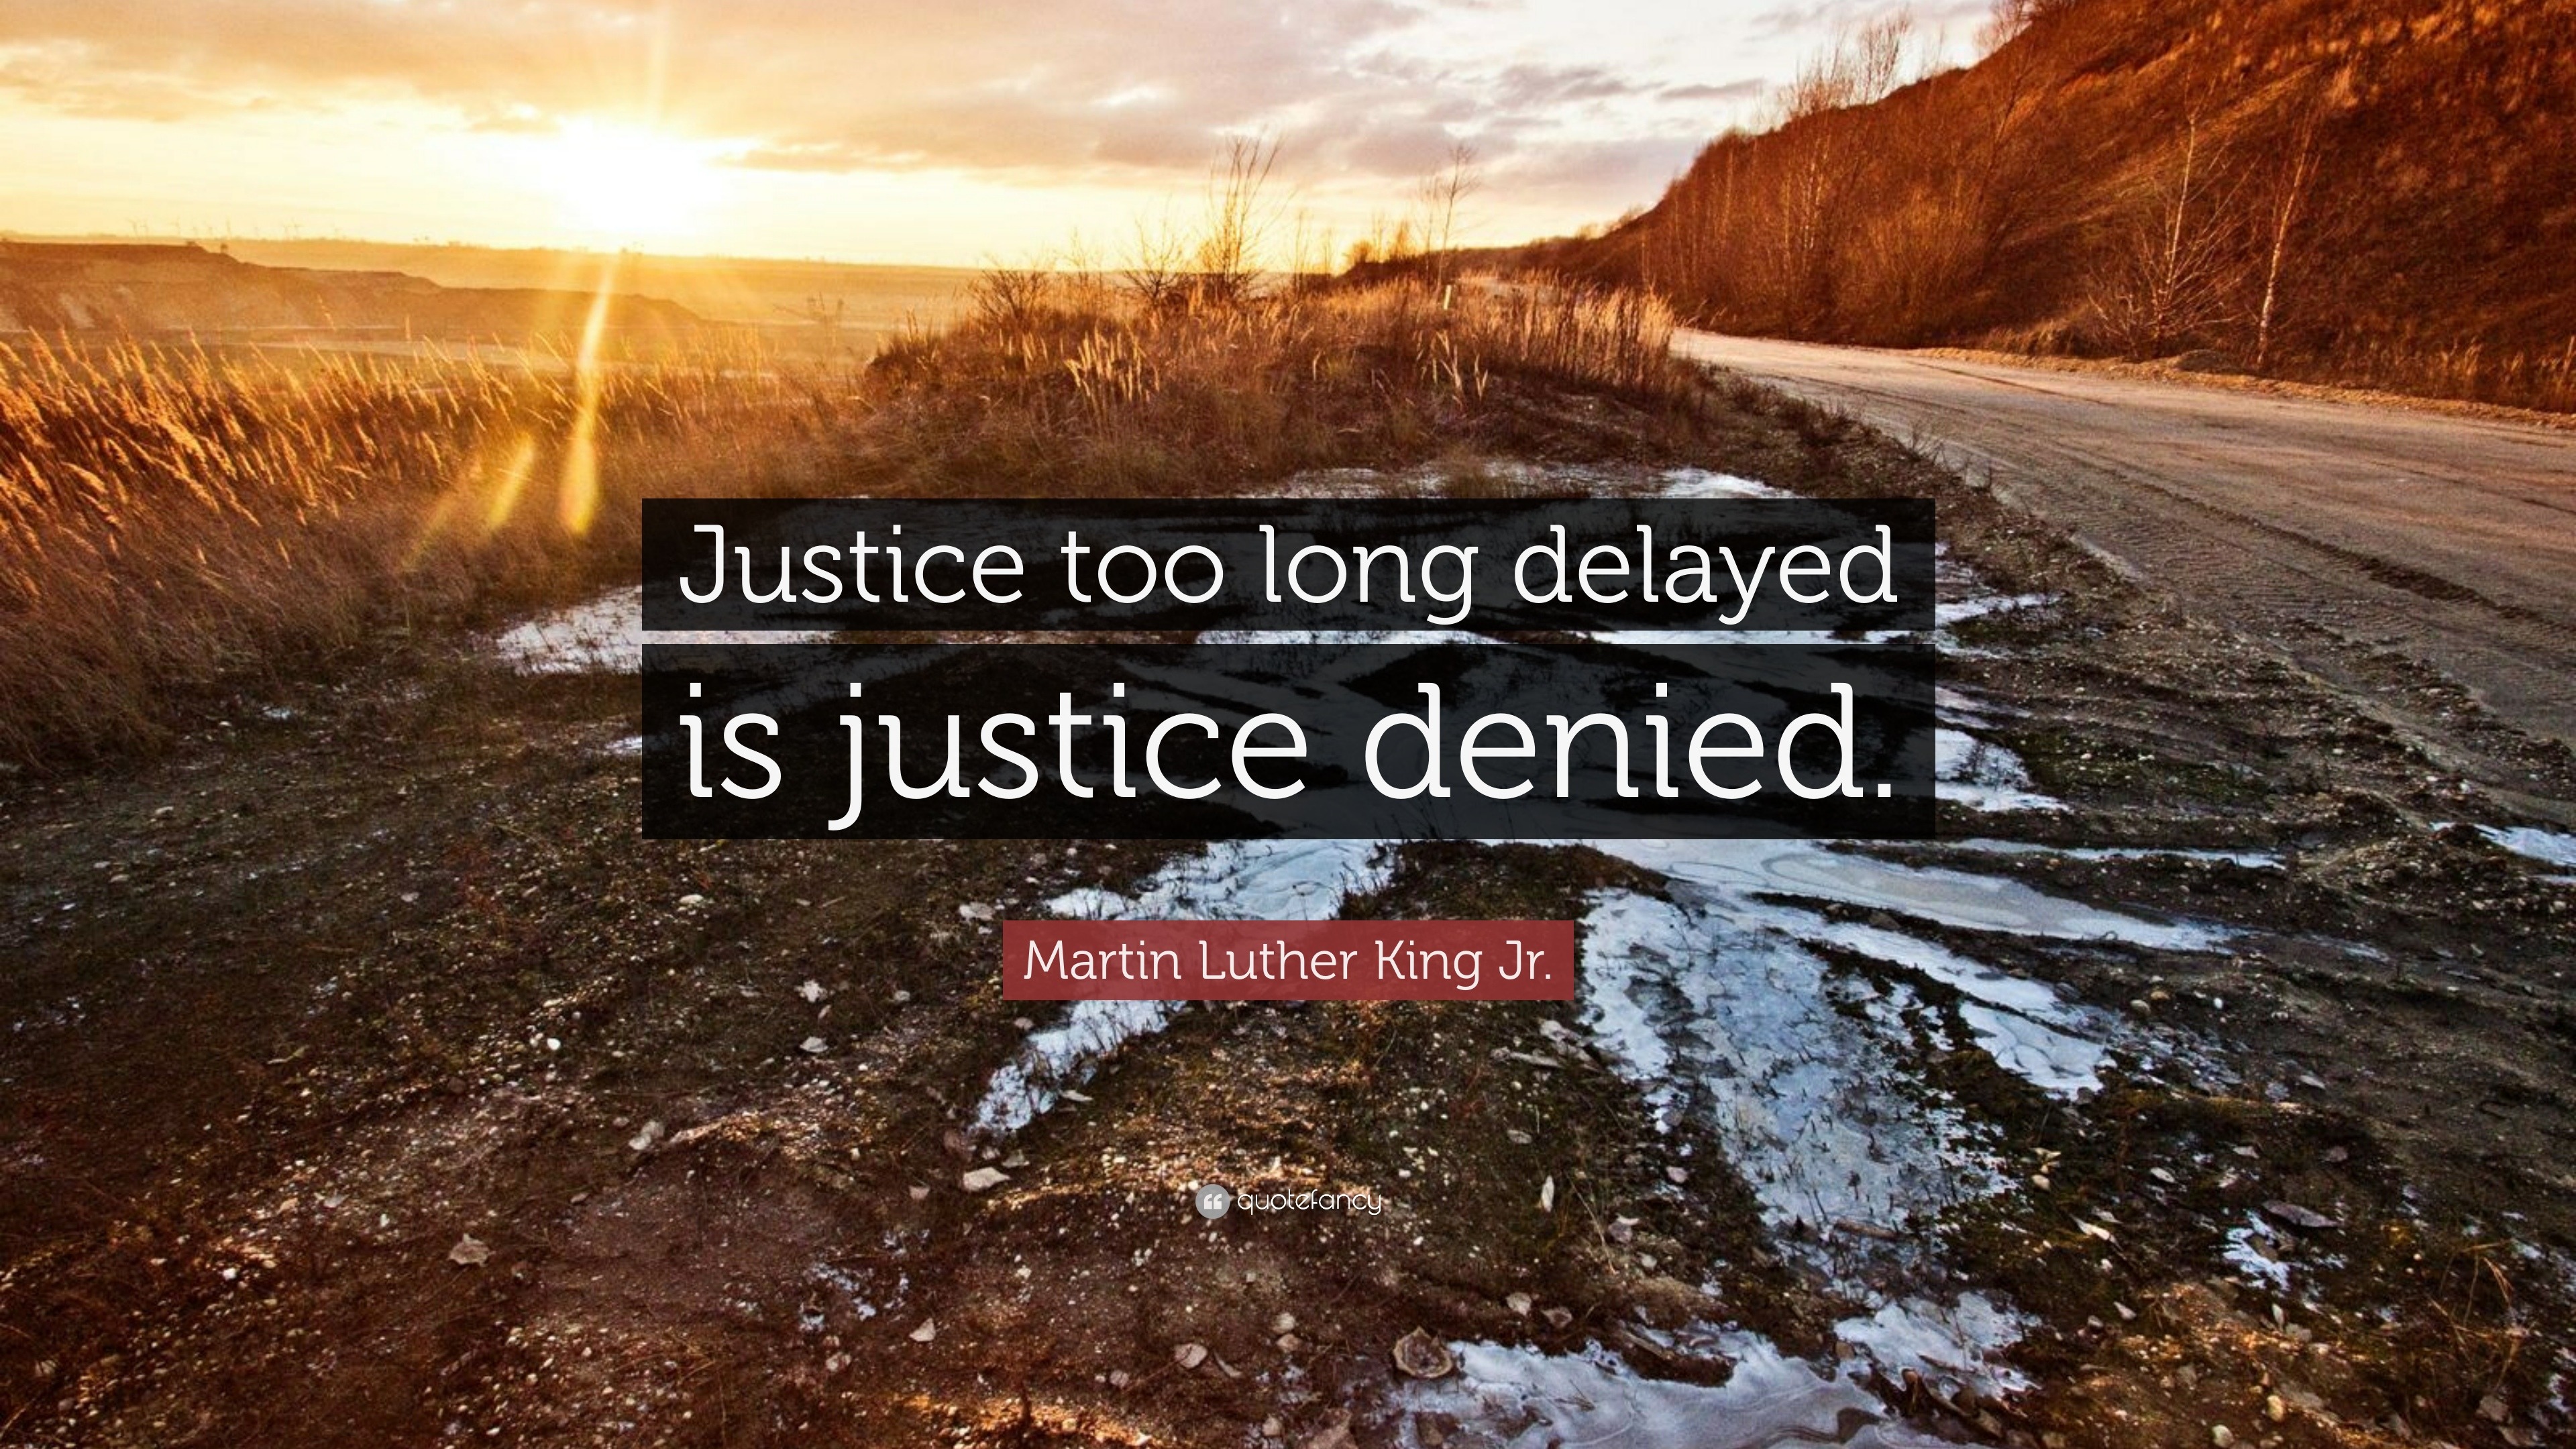 write an essay about justice delayed is justice denied